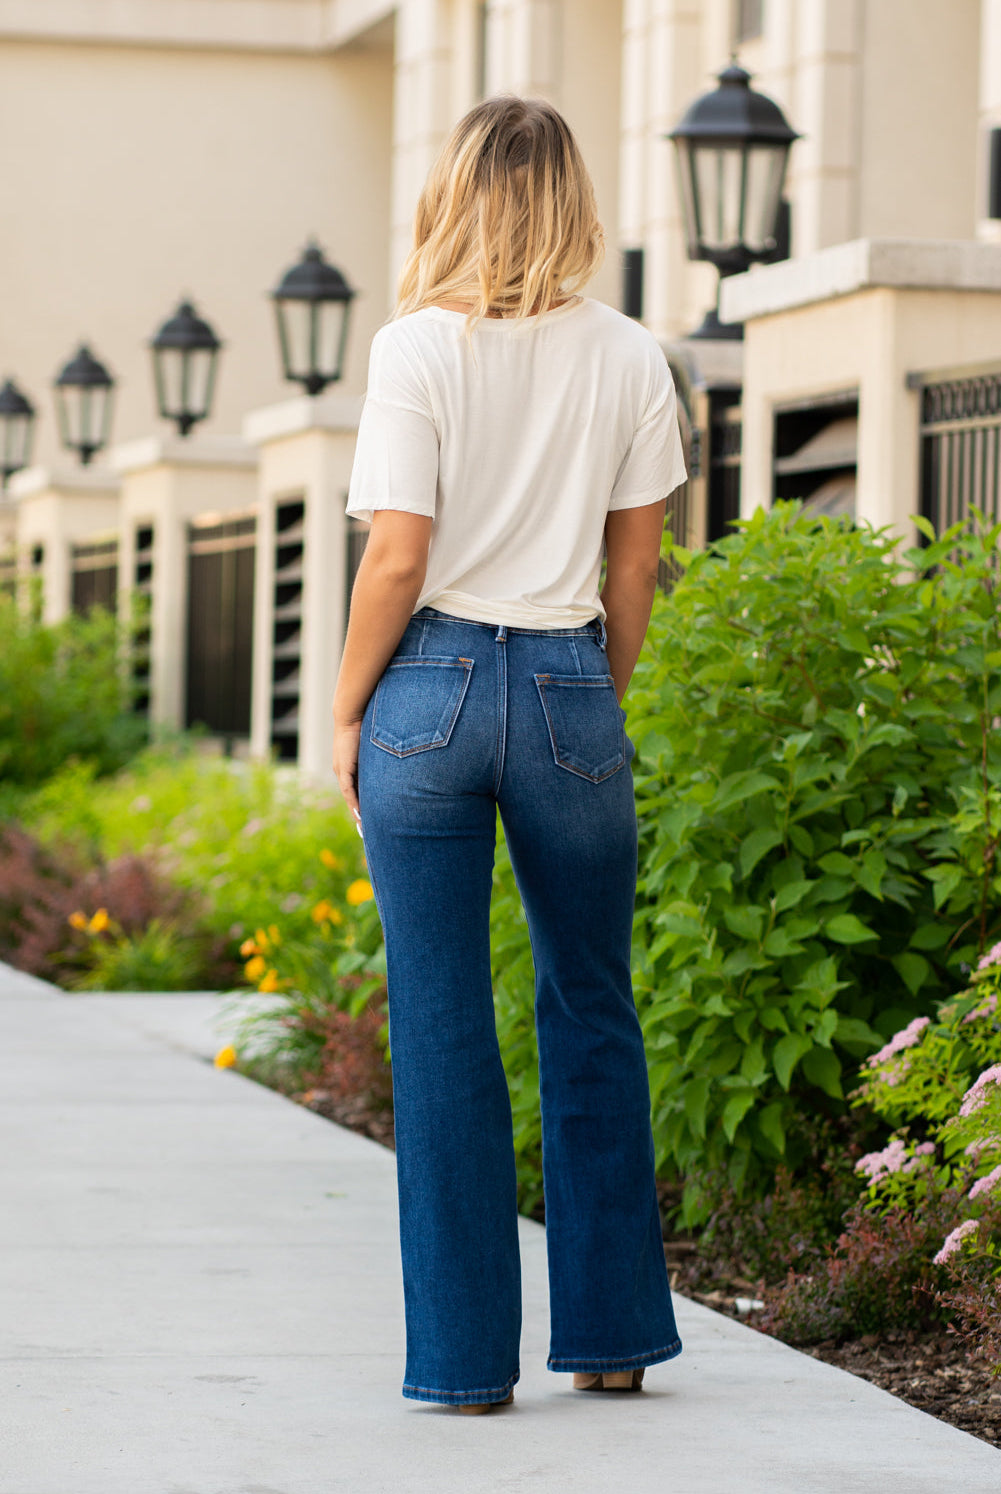 KanCan Jeans  You will love the way these flare cuts fit your curves. Dress up with heels and a cute flutter sleeve top for a night out.  Collection: Spring 2021 Color: Medium Blue Cut: Flare Cut, 34" Inseam Rise: High-Rise, 11" Front Rise 93% COTTON 5% POLYESTER 2% SPANDEX Stitching: Classic Fly: Zipper Style #: KC9248M Contact us for any additional measurements or sizing.